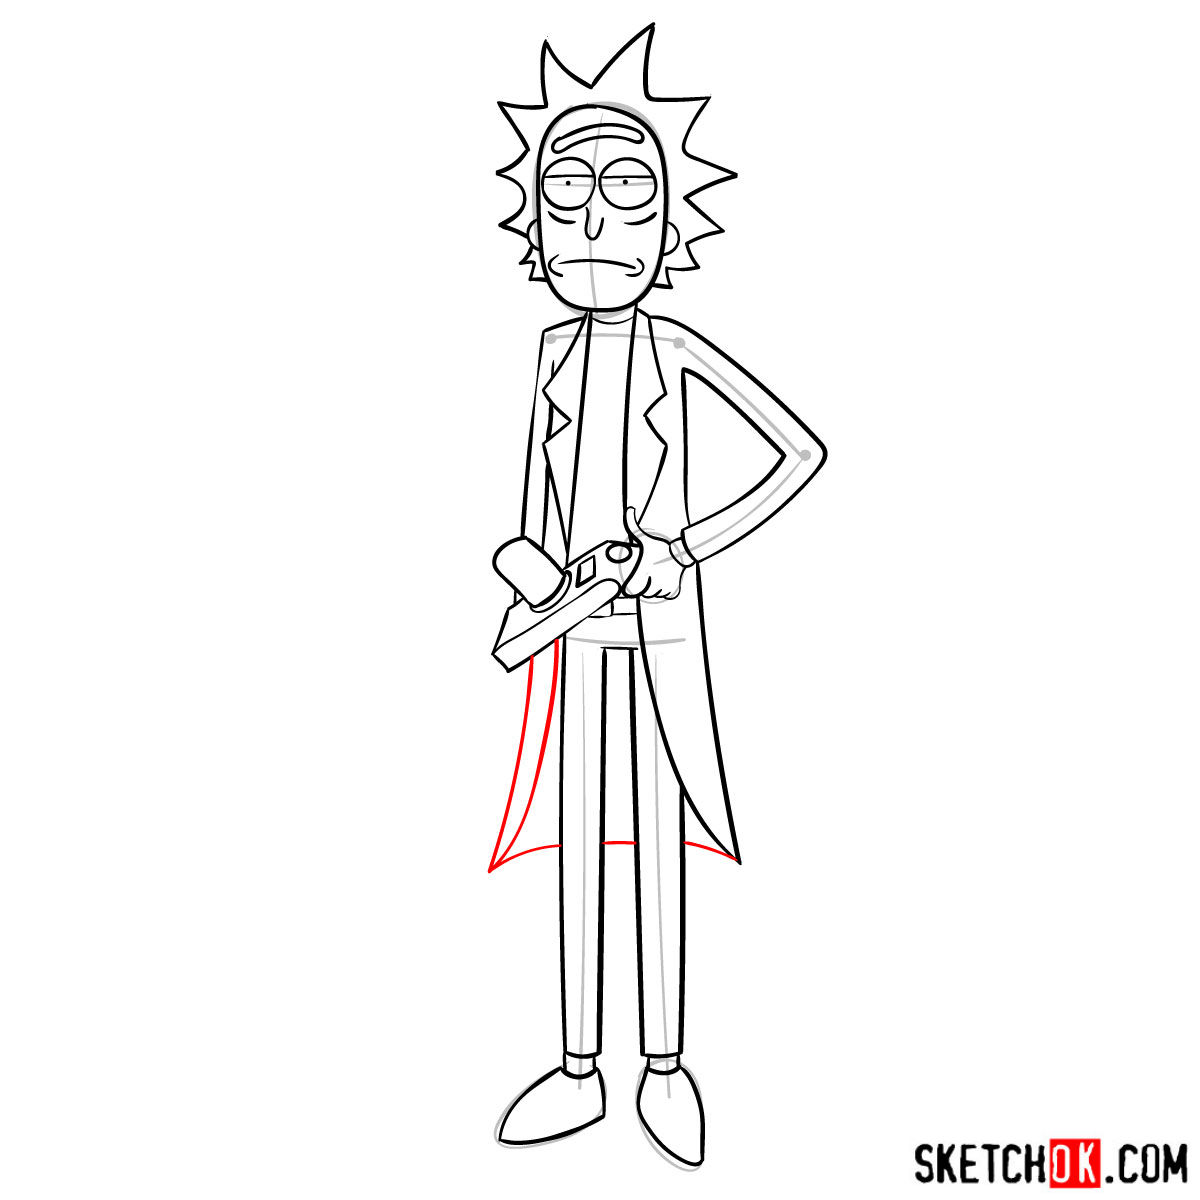 How to draw Rick Sanchez (Rick and Morty) - step 11